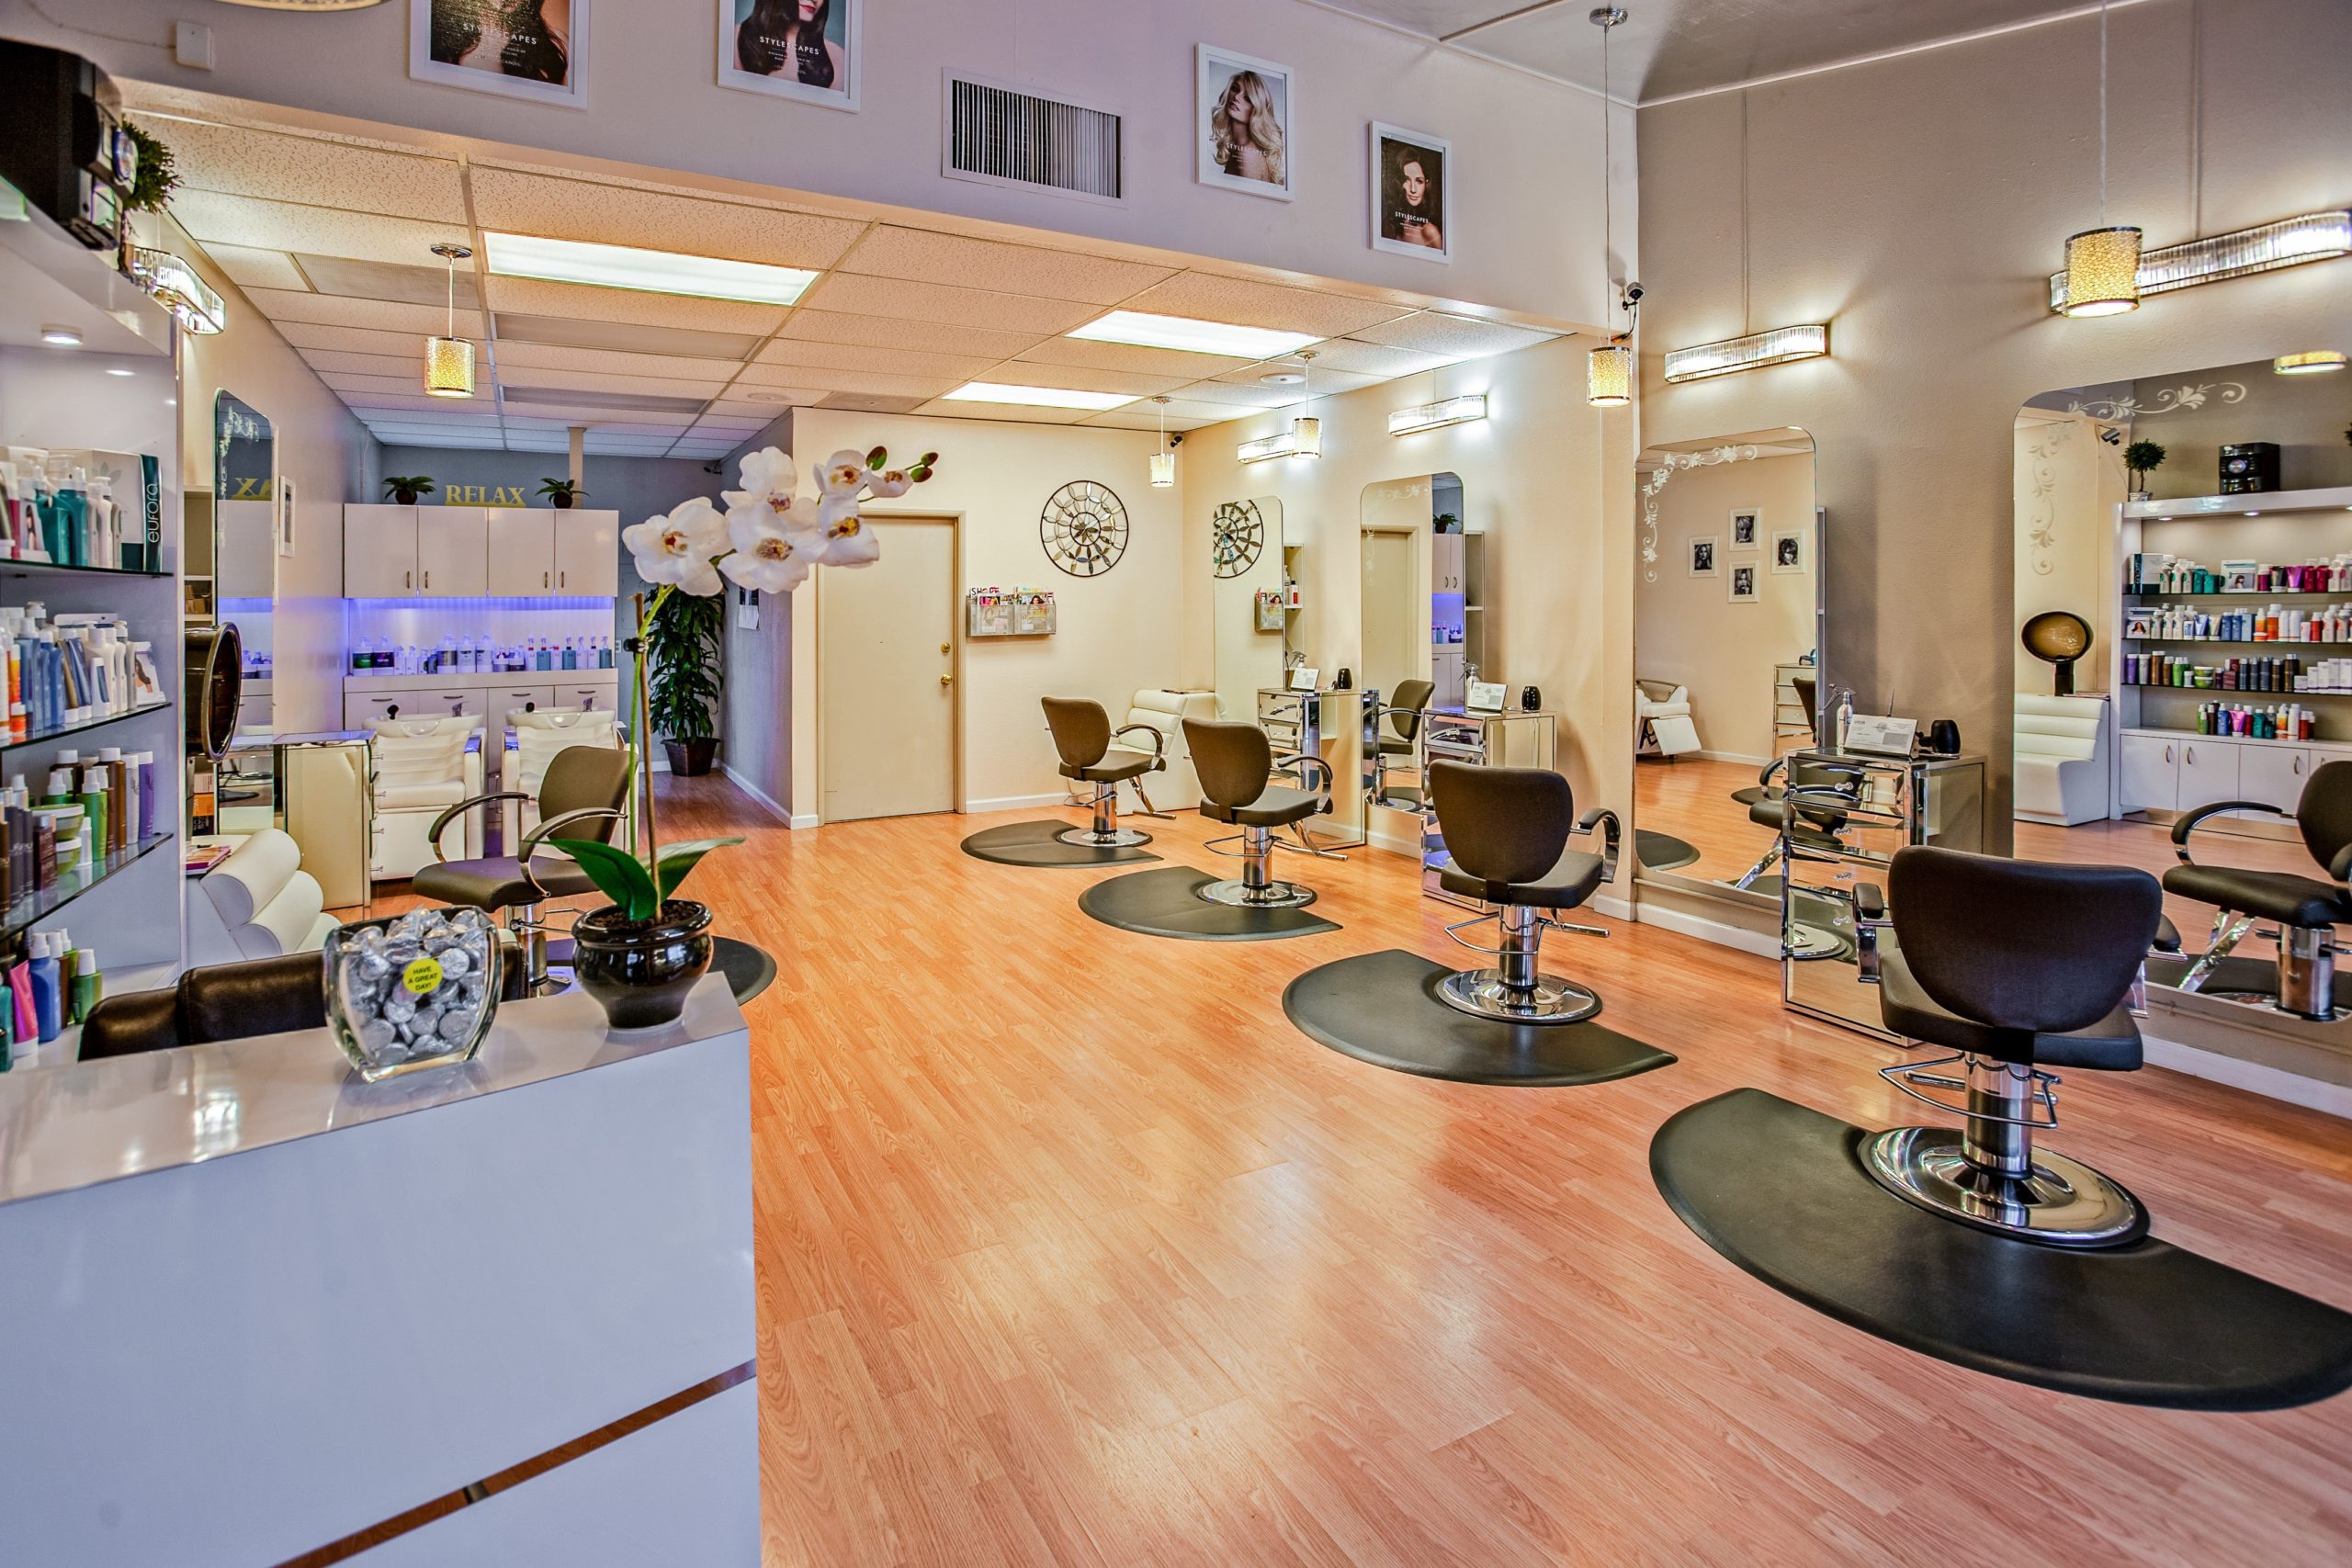 importance of personal presentation hygiene and conduct in a salon